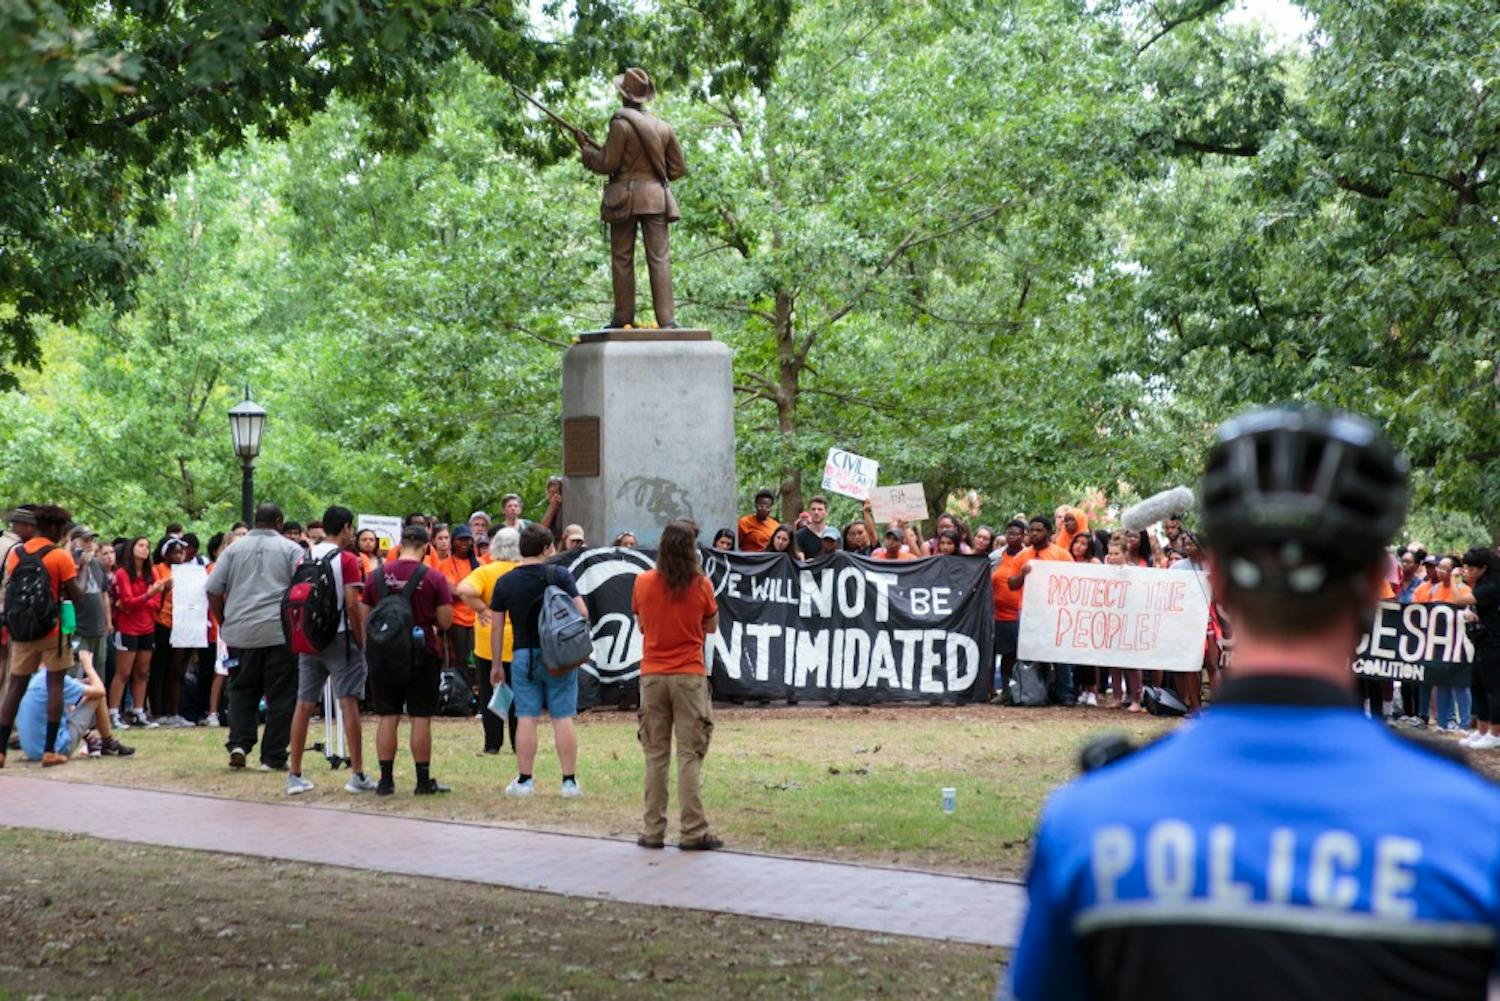 Police watch over a group of protestors near the Silent Sam statue during a demonstration on Thursday afternoon.&nbsp;